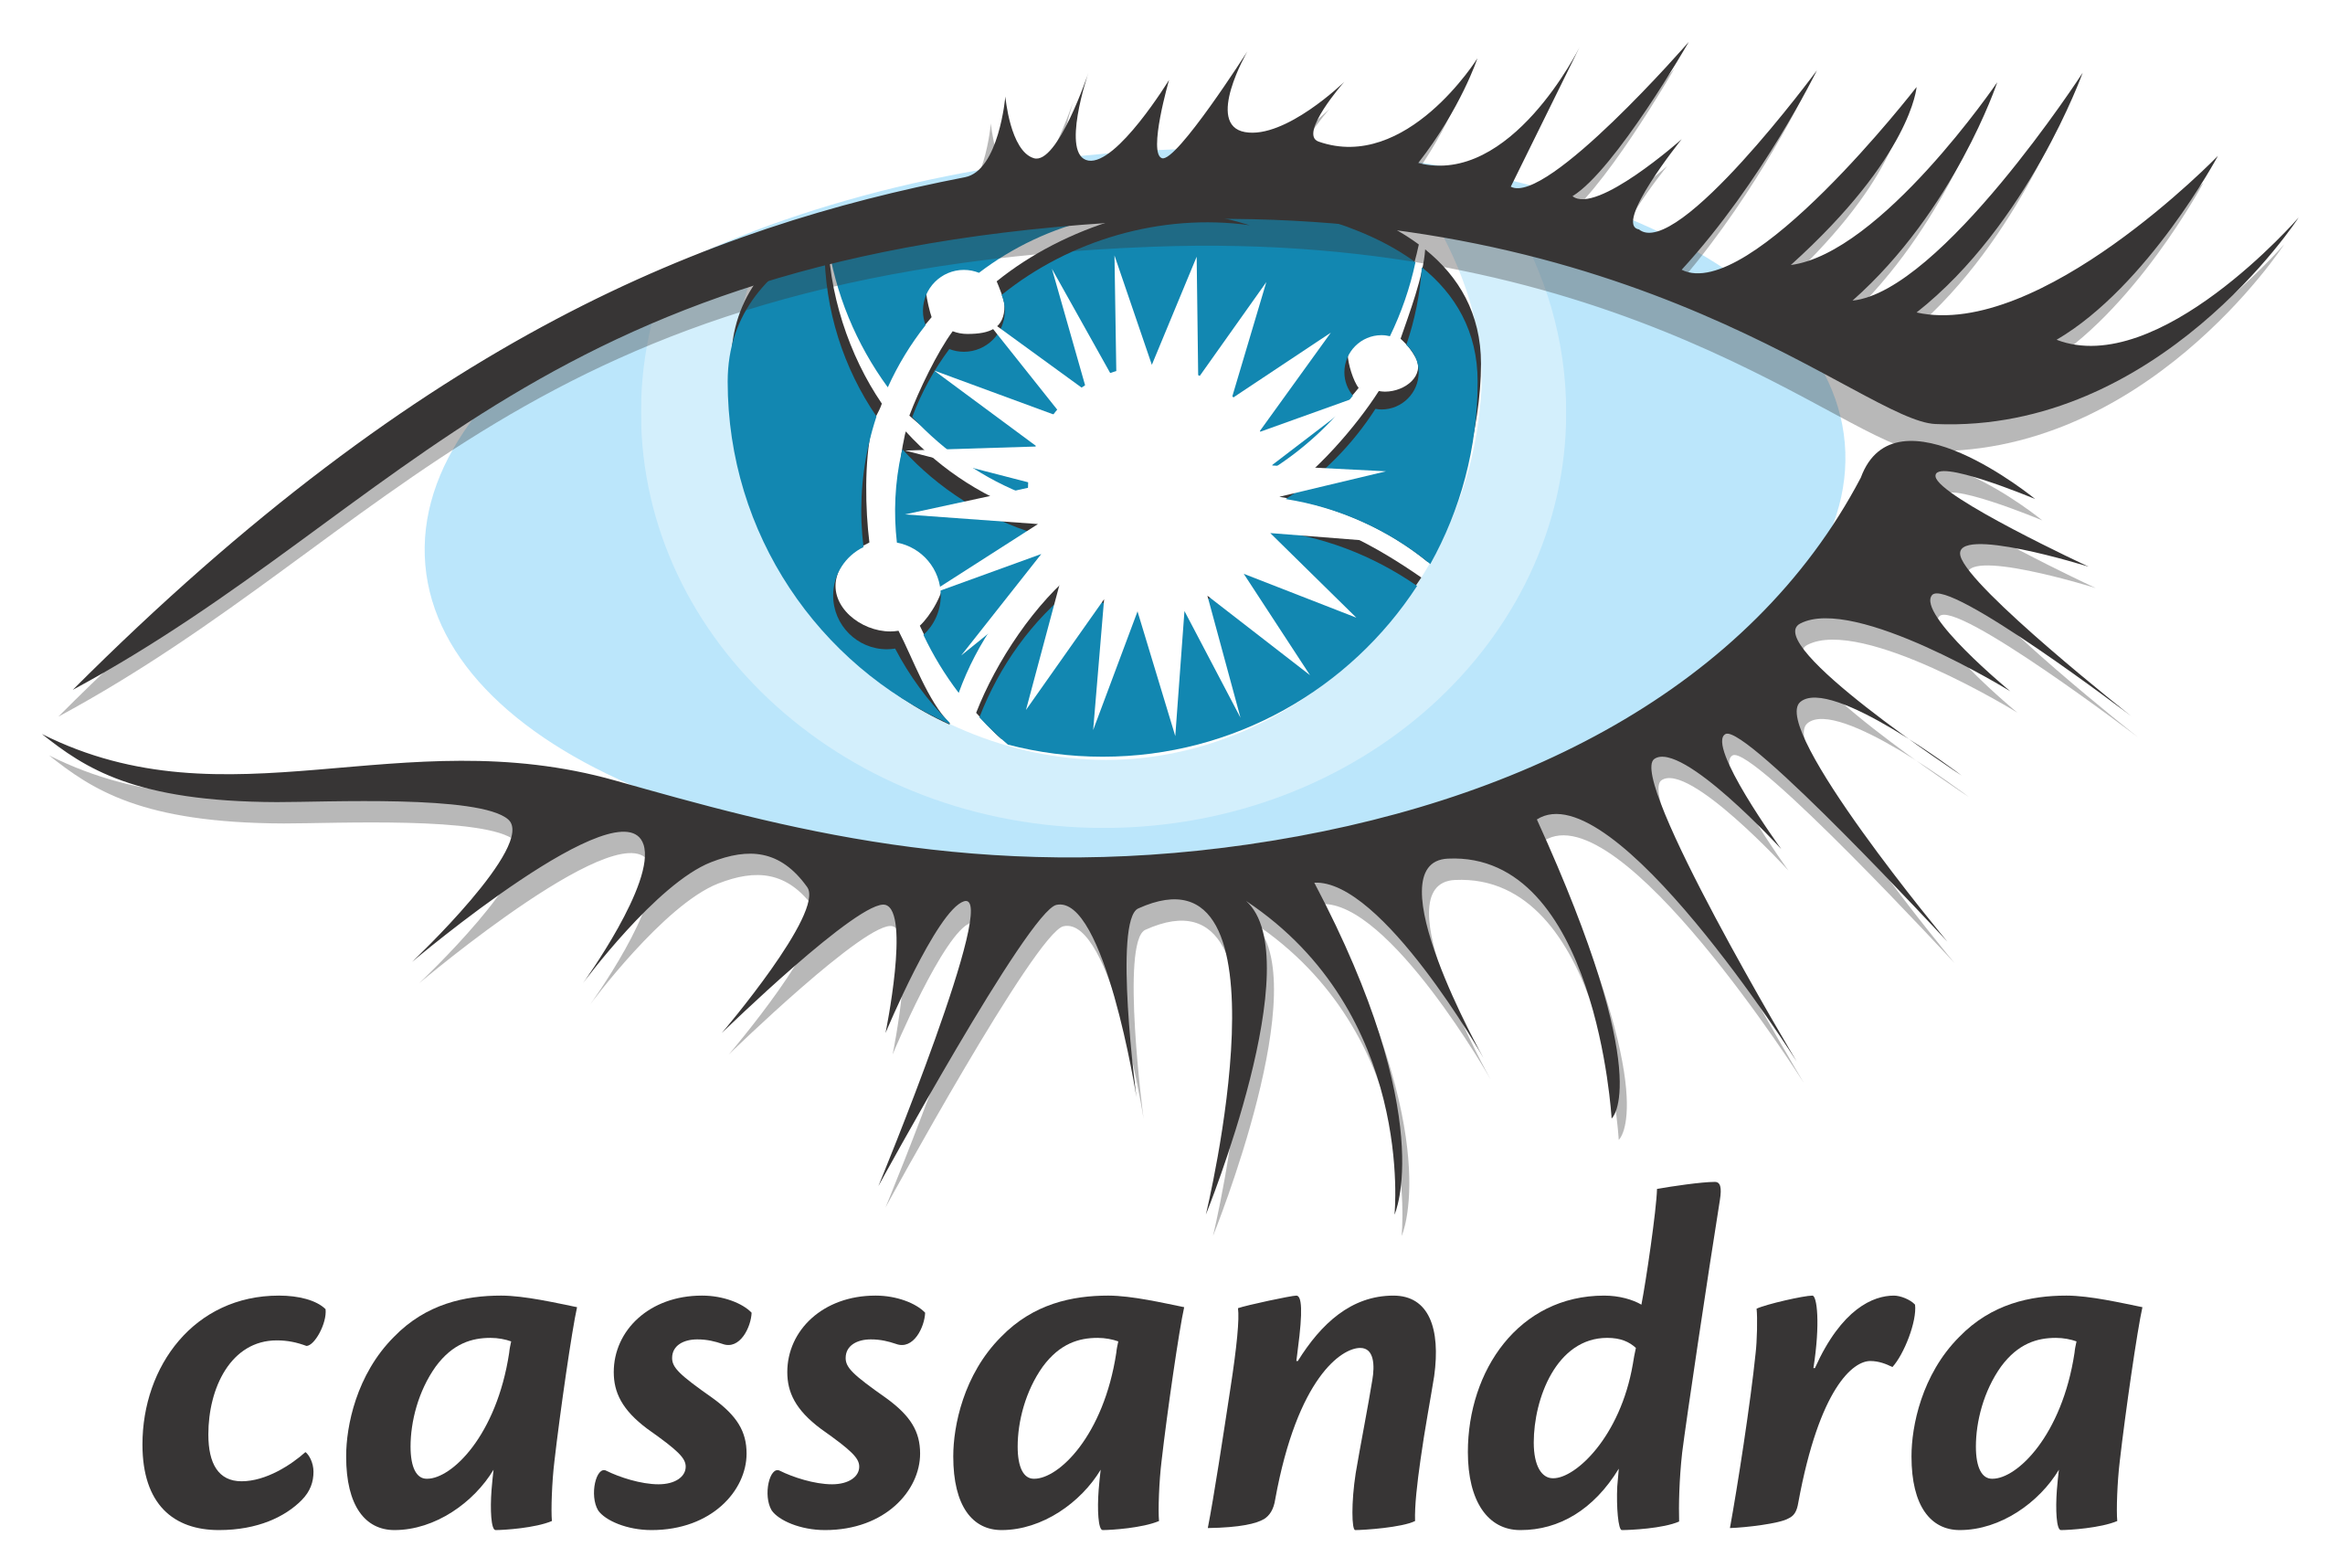 How to Install Cassandra on Gnu+Linux - Featured